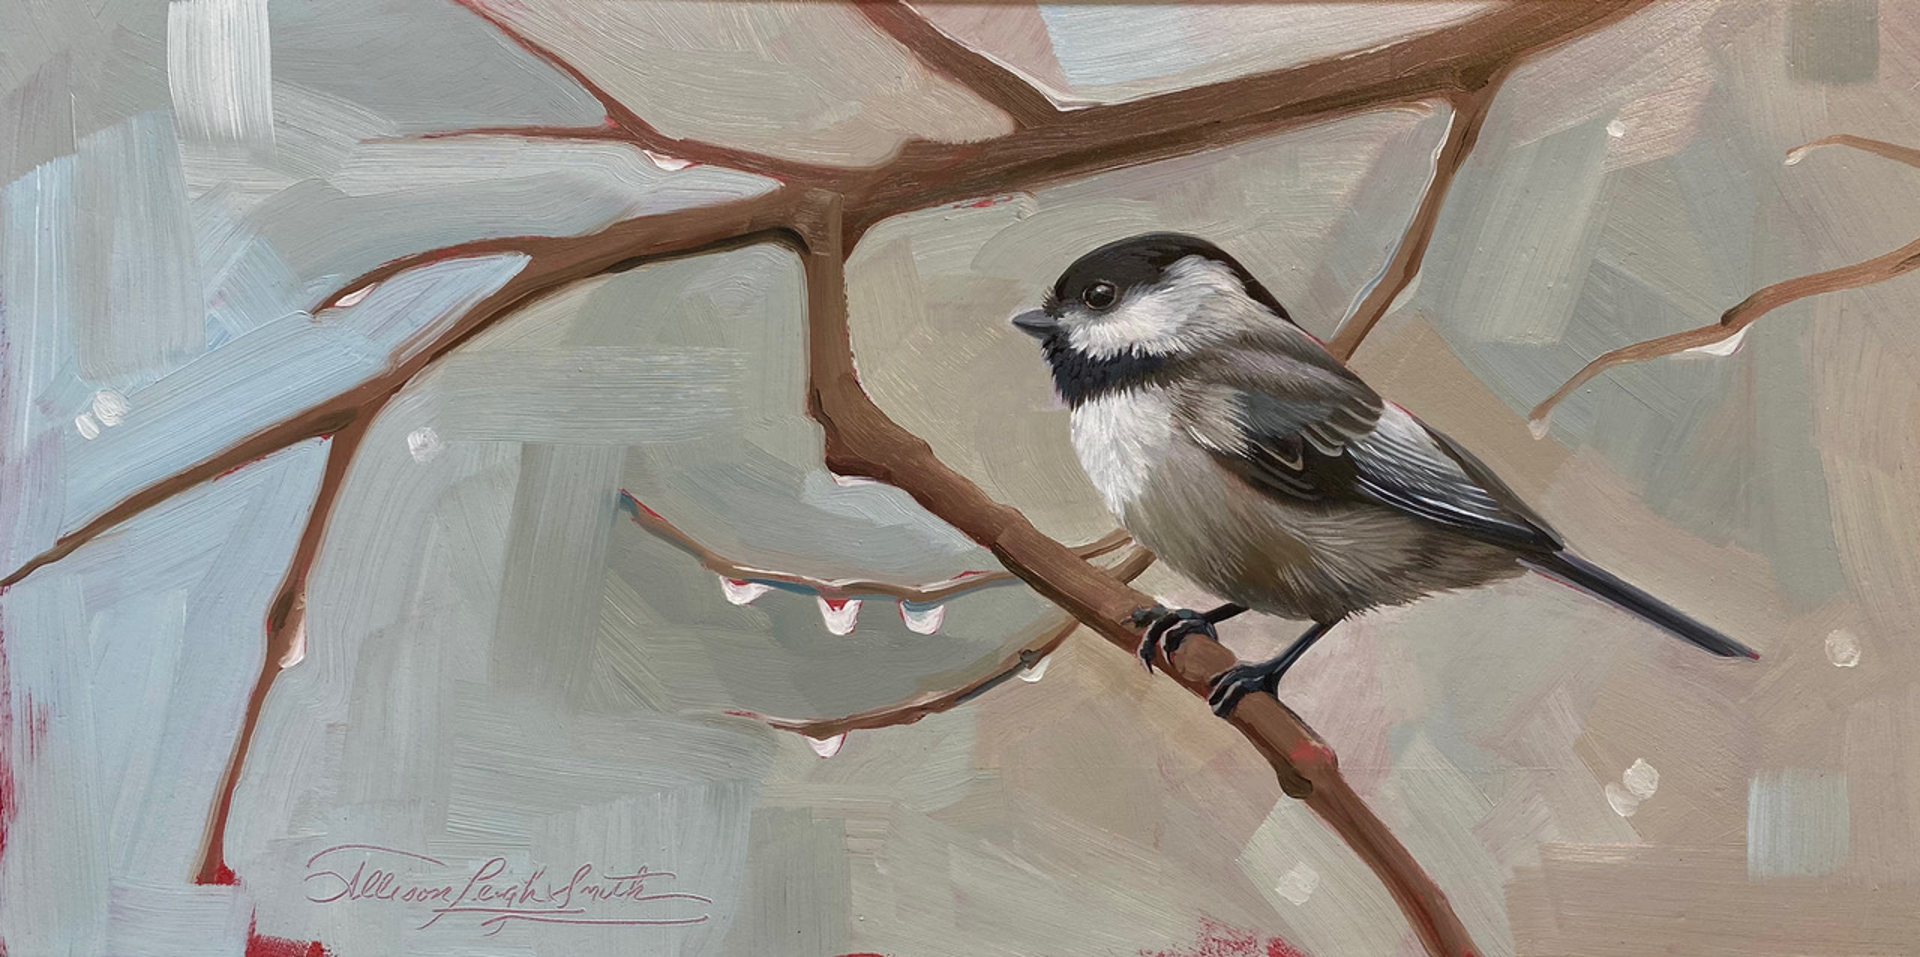 Chickadee by Allison Leigh Smith